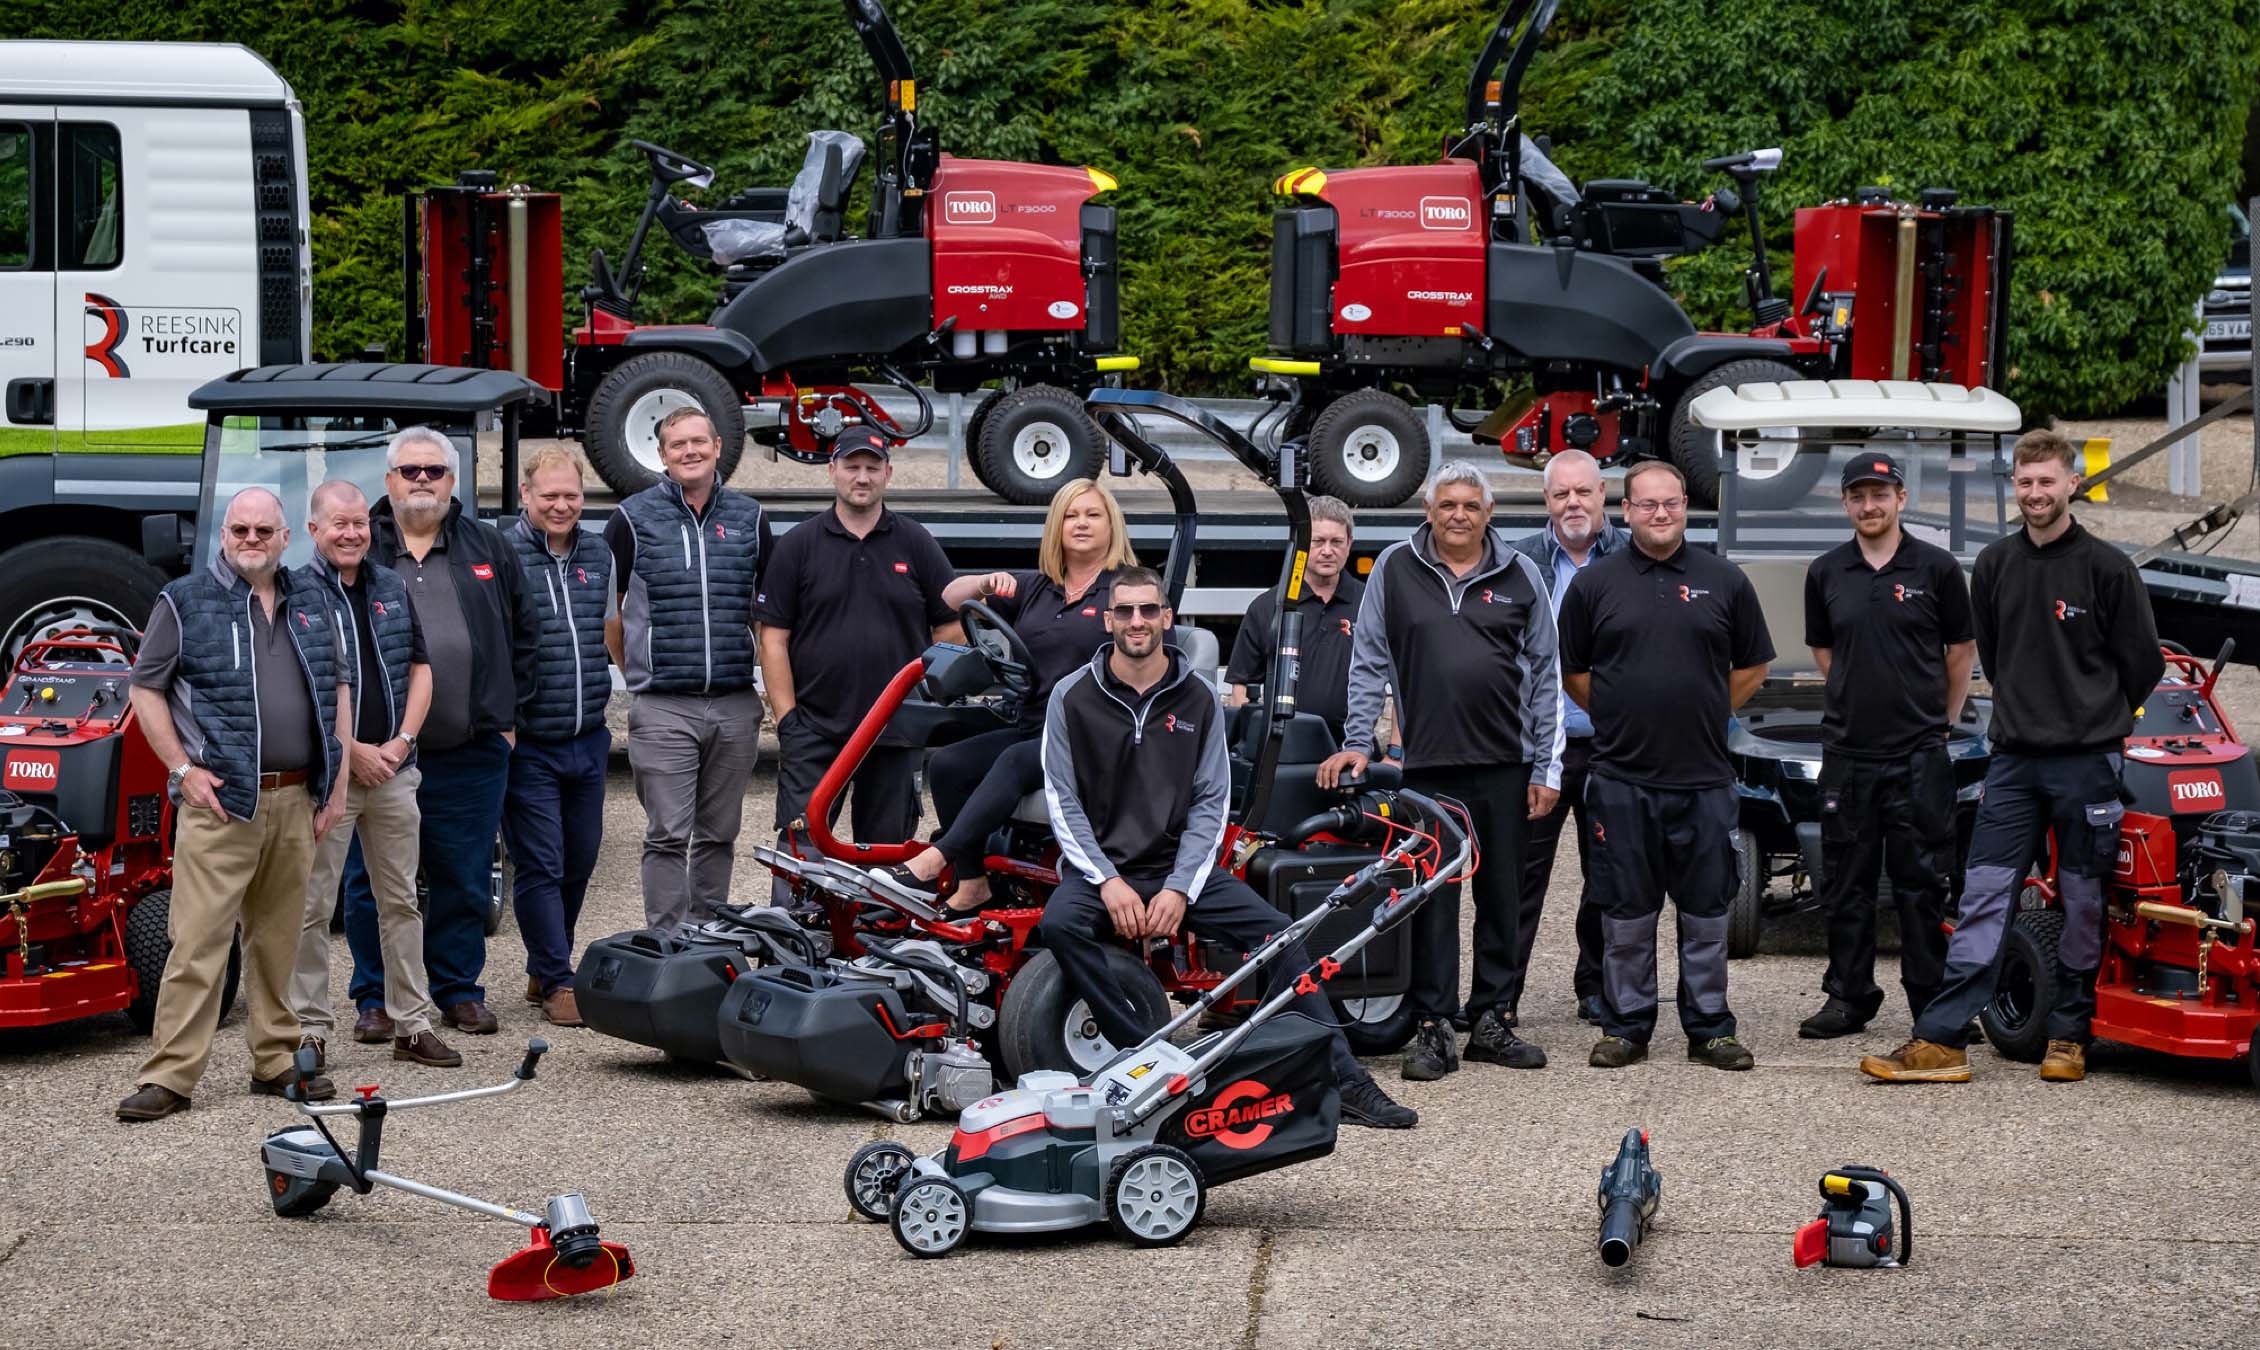 The team at Reesink Burwell